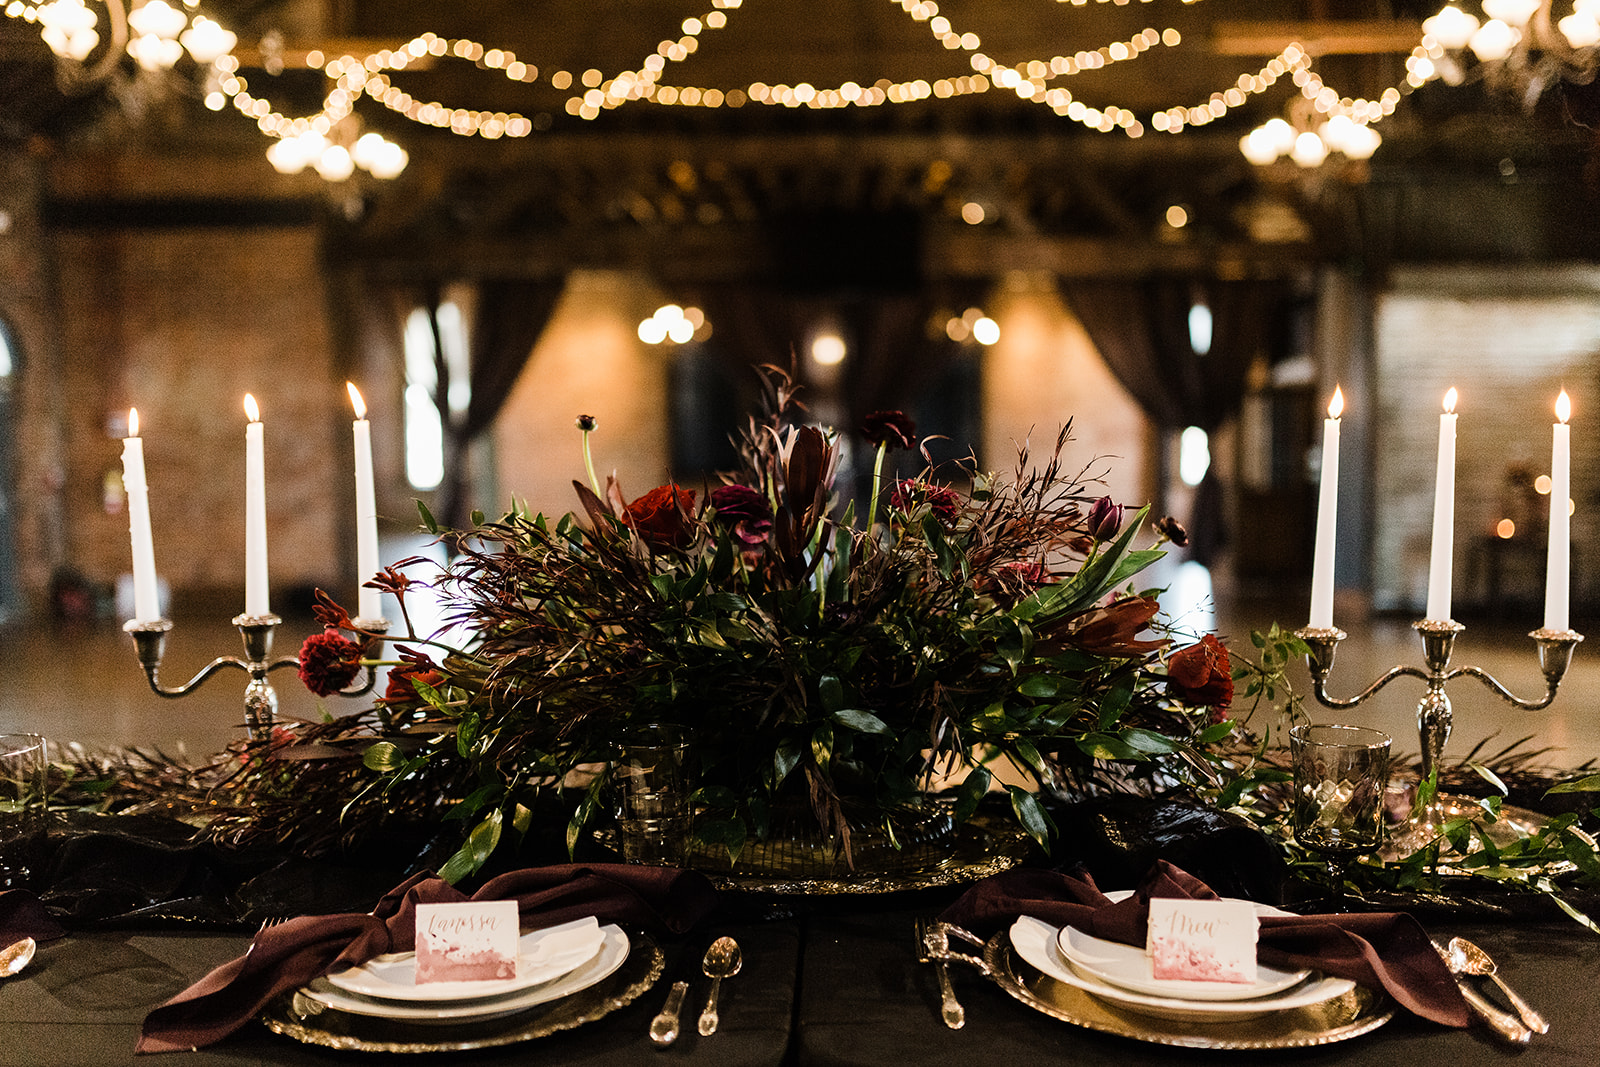 A dark, gothic floral arrangement on the head table at a wedding.